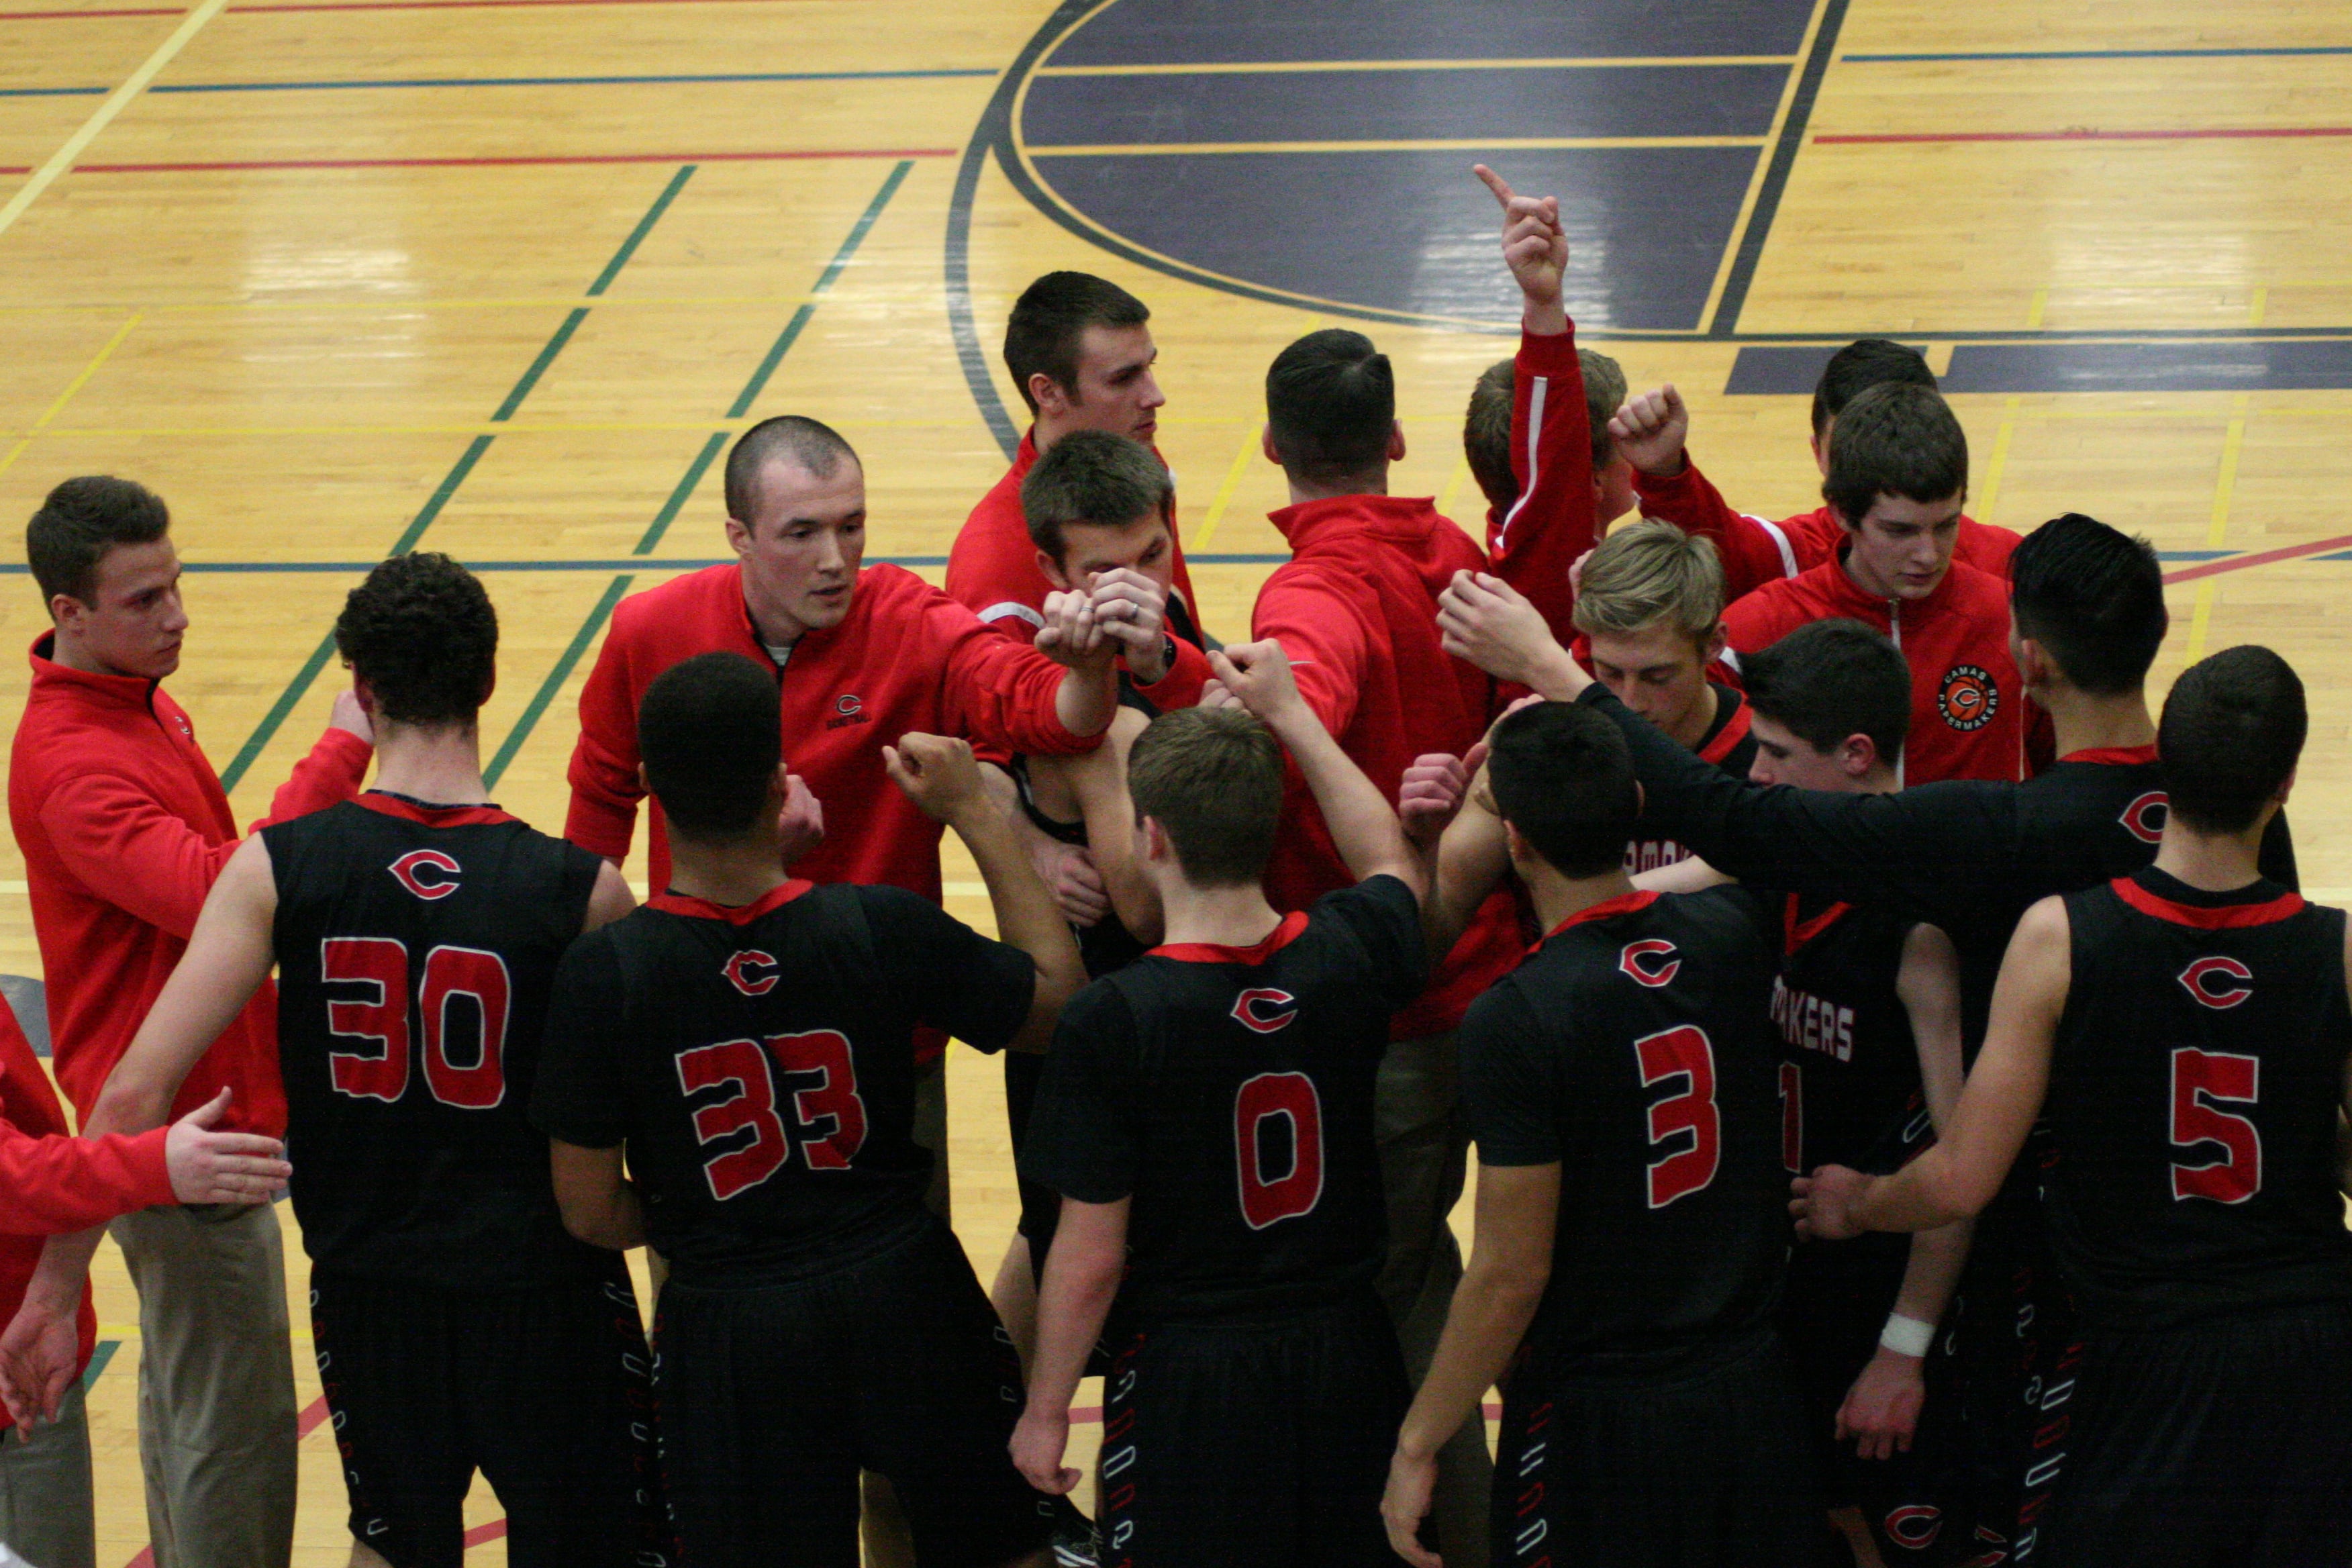 The Camas boys basketball players and coaches band together for one final push in the fourth quarter.